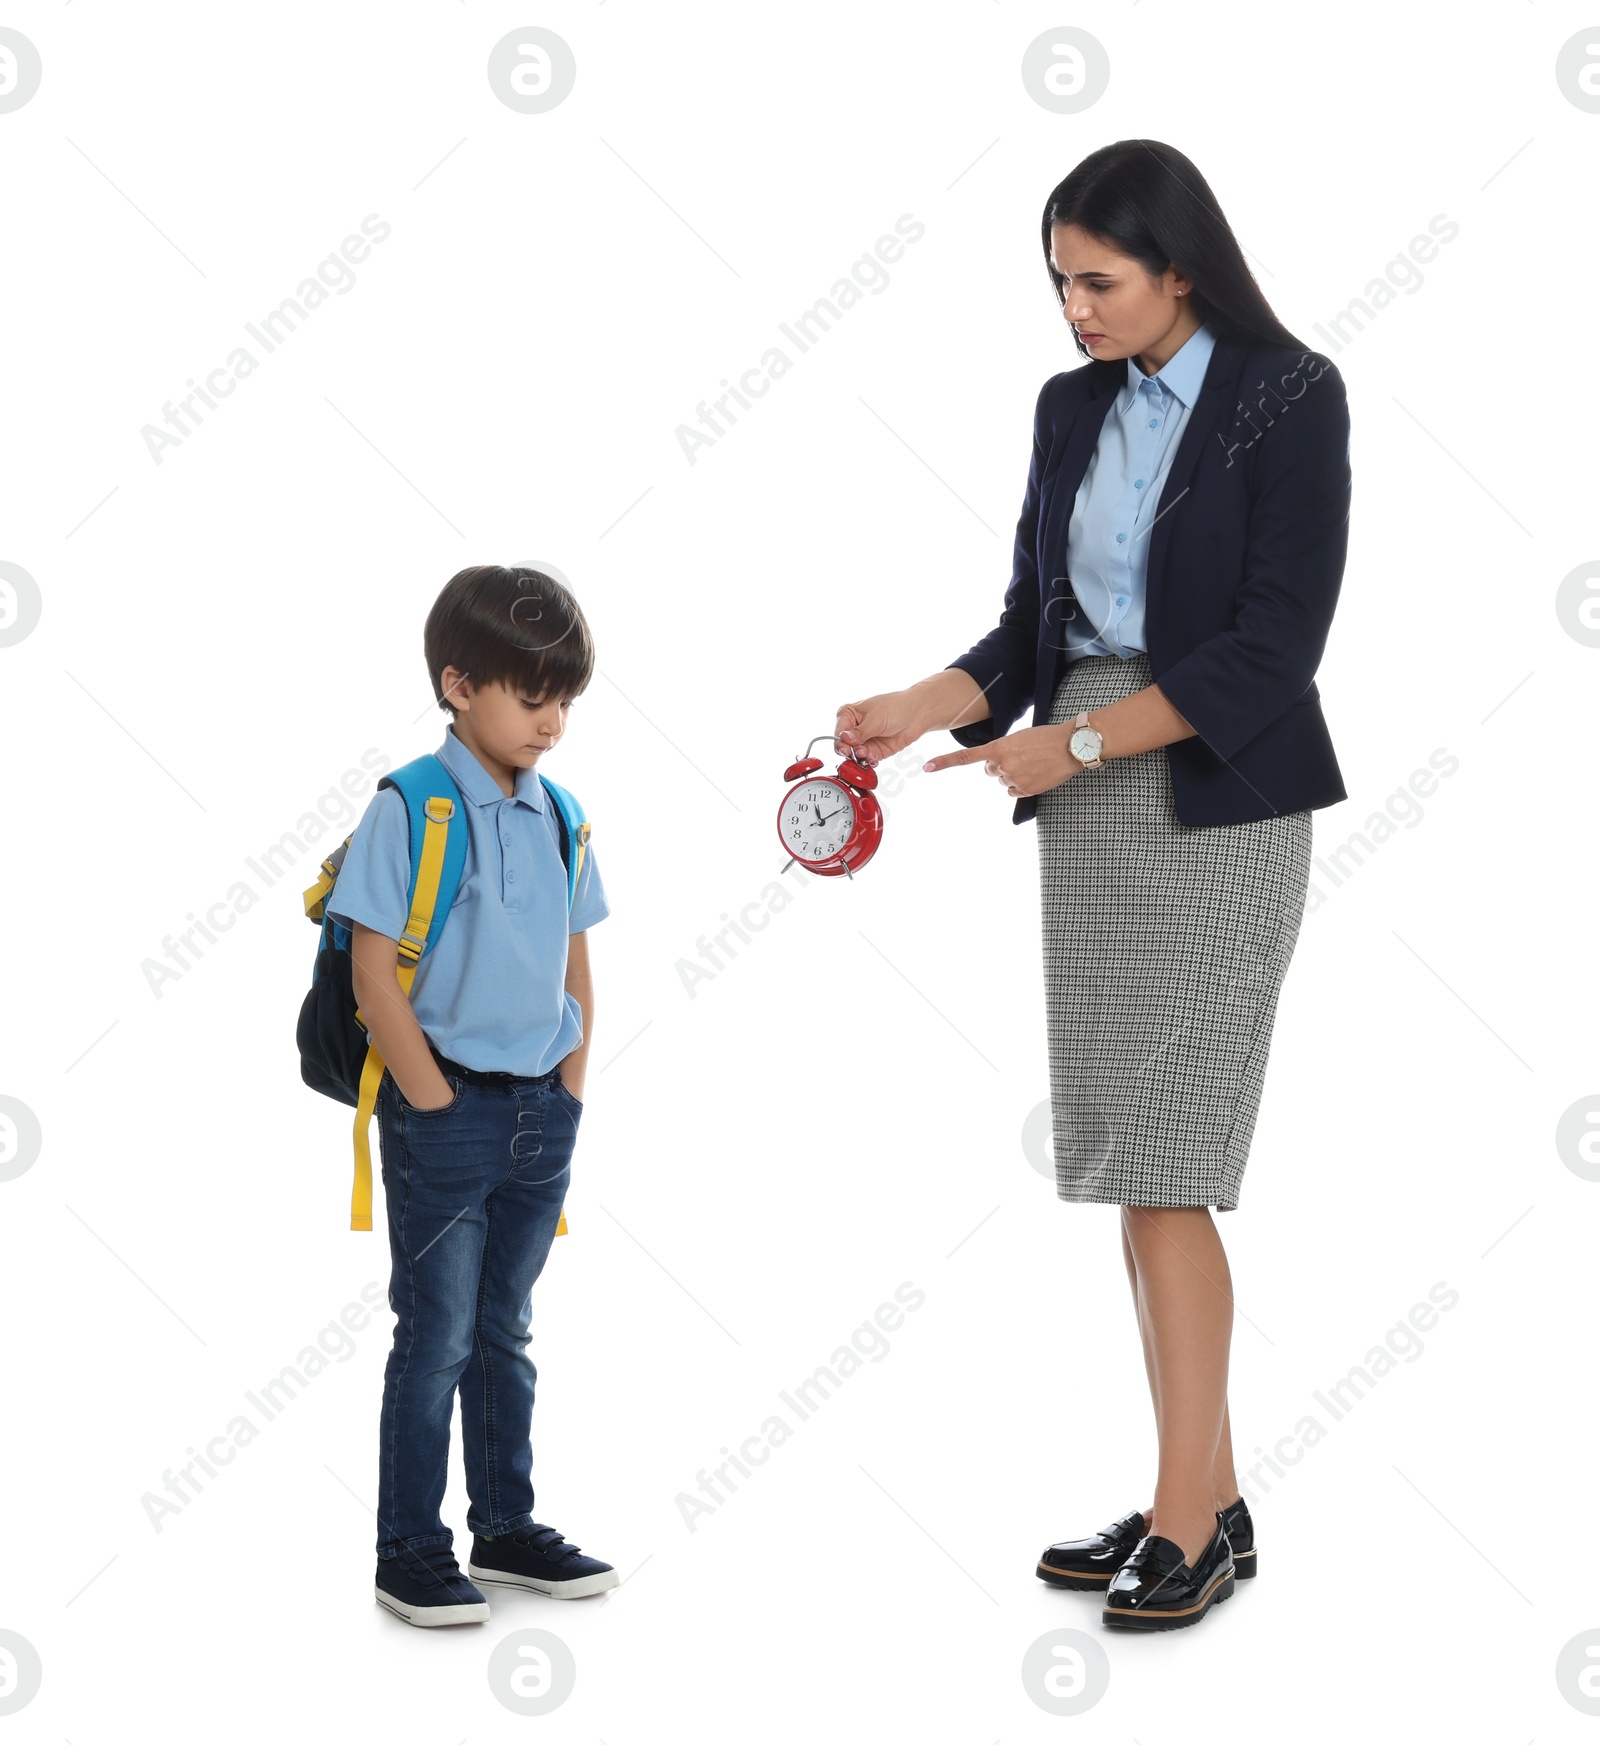 Photo of Teacher with alarm clock scolding pupil for being late against white background